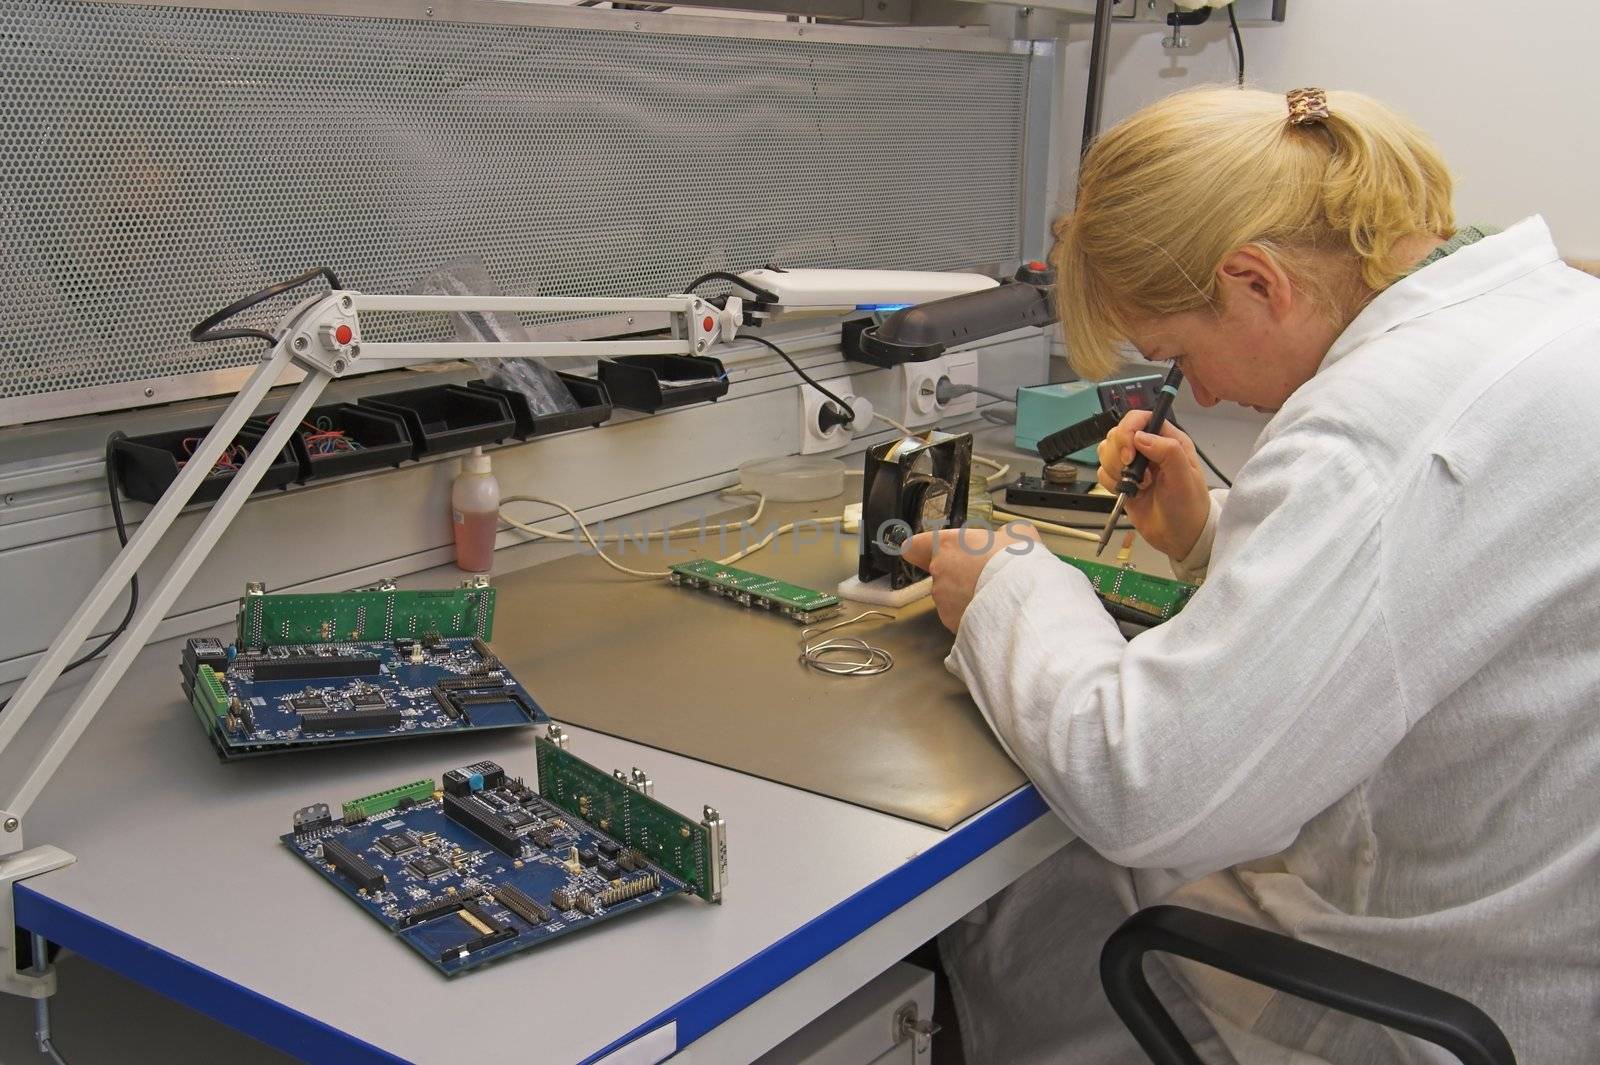 Engineer working with circuits - A woman engineer solders circuits sitting at a table.